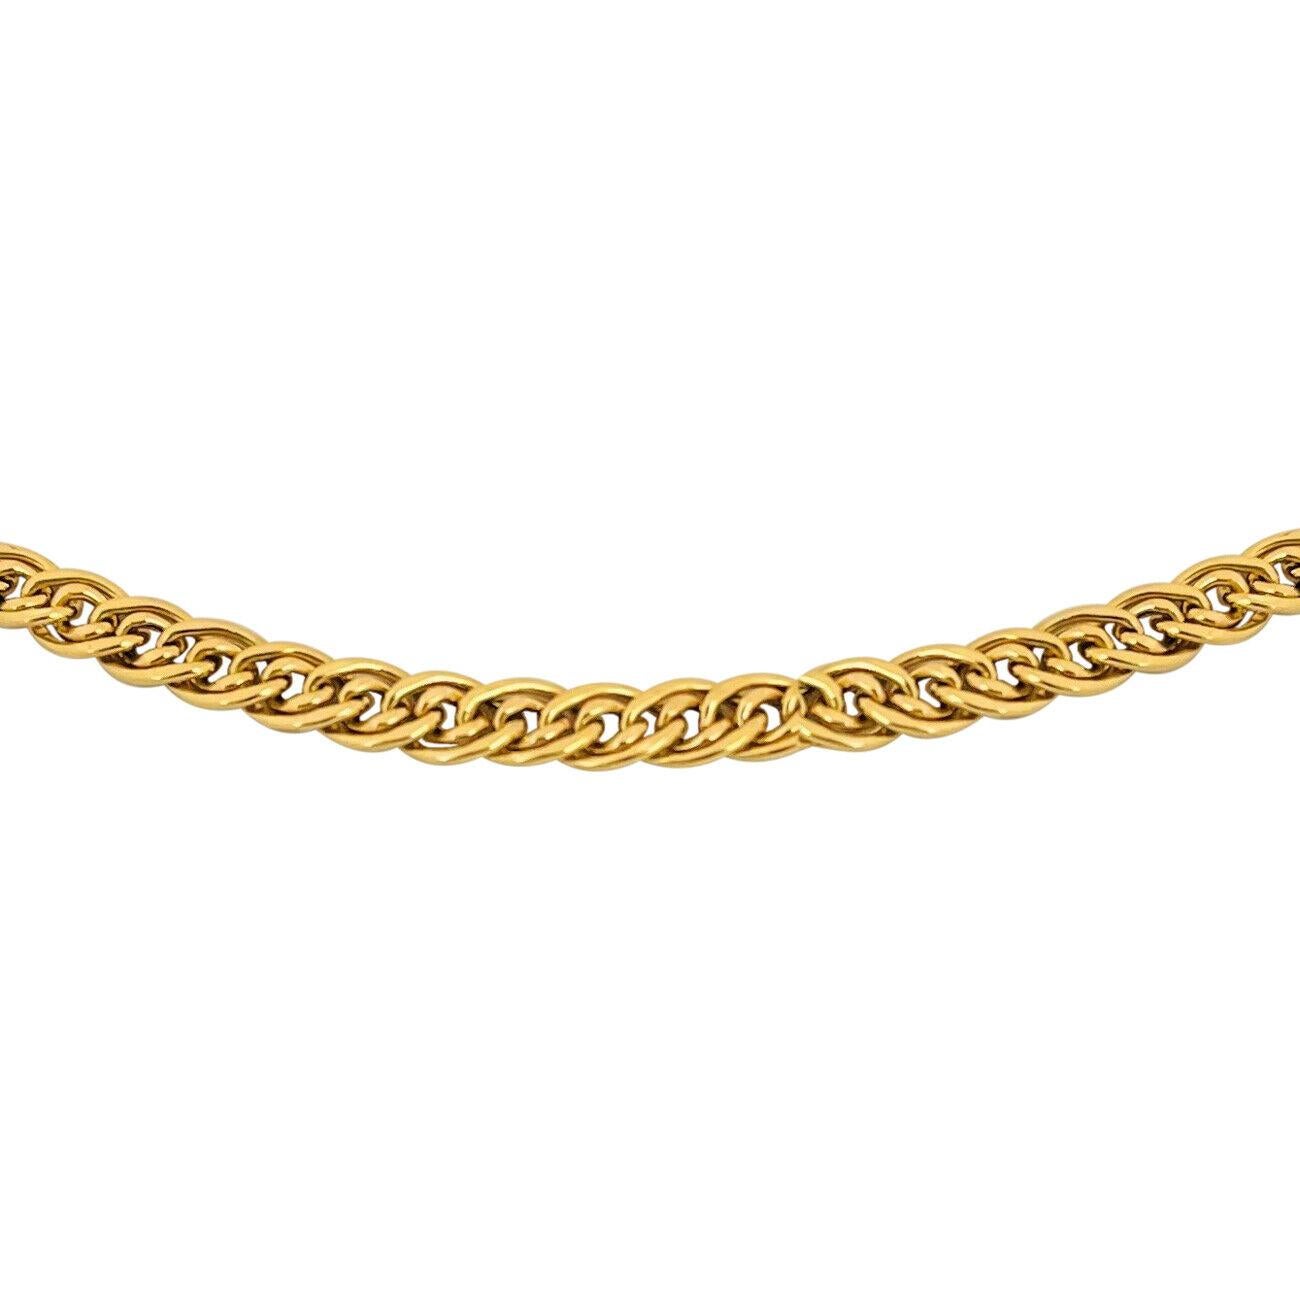 italian gold fine curb link 18 chain necklace in 14k gold - yellow gold